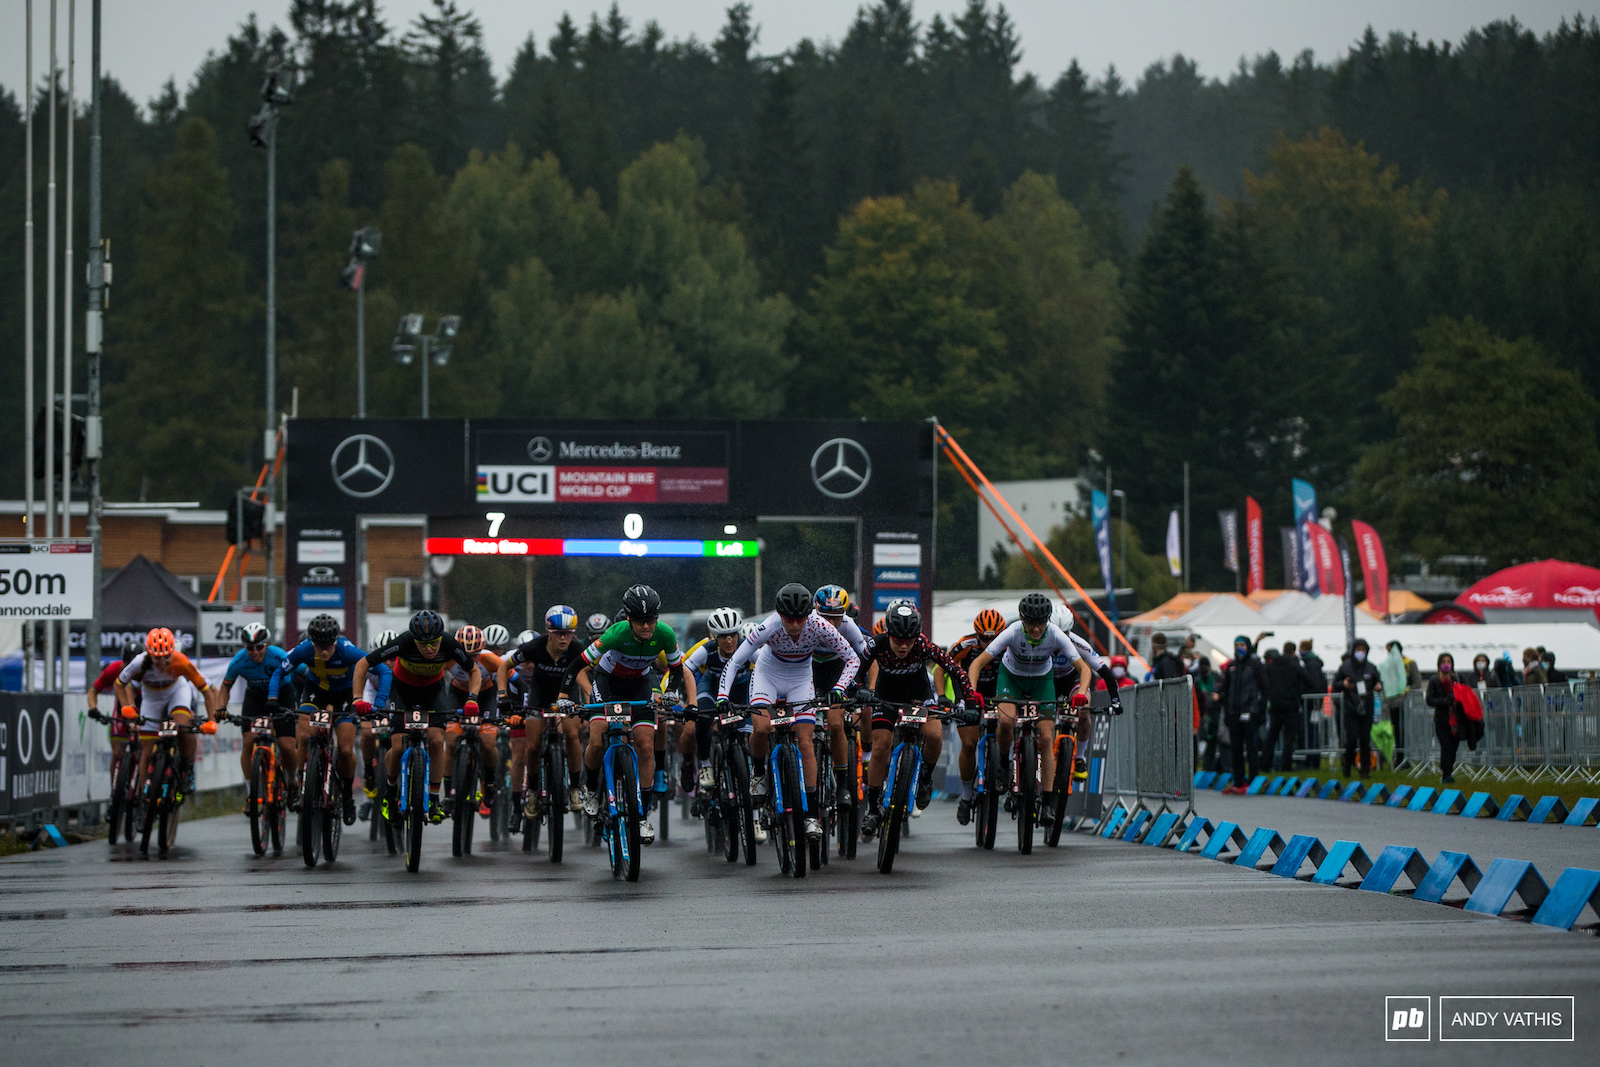 Just like that the 2020 season is underway with the women s start.